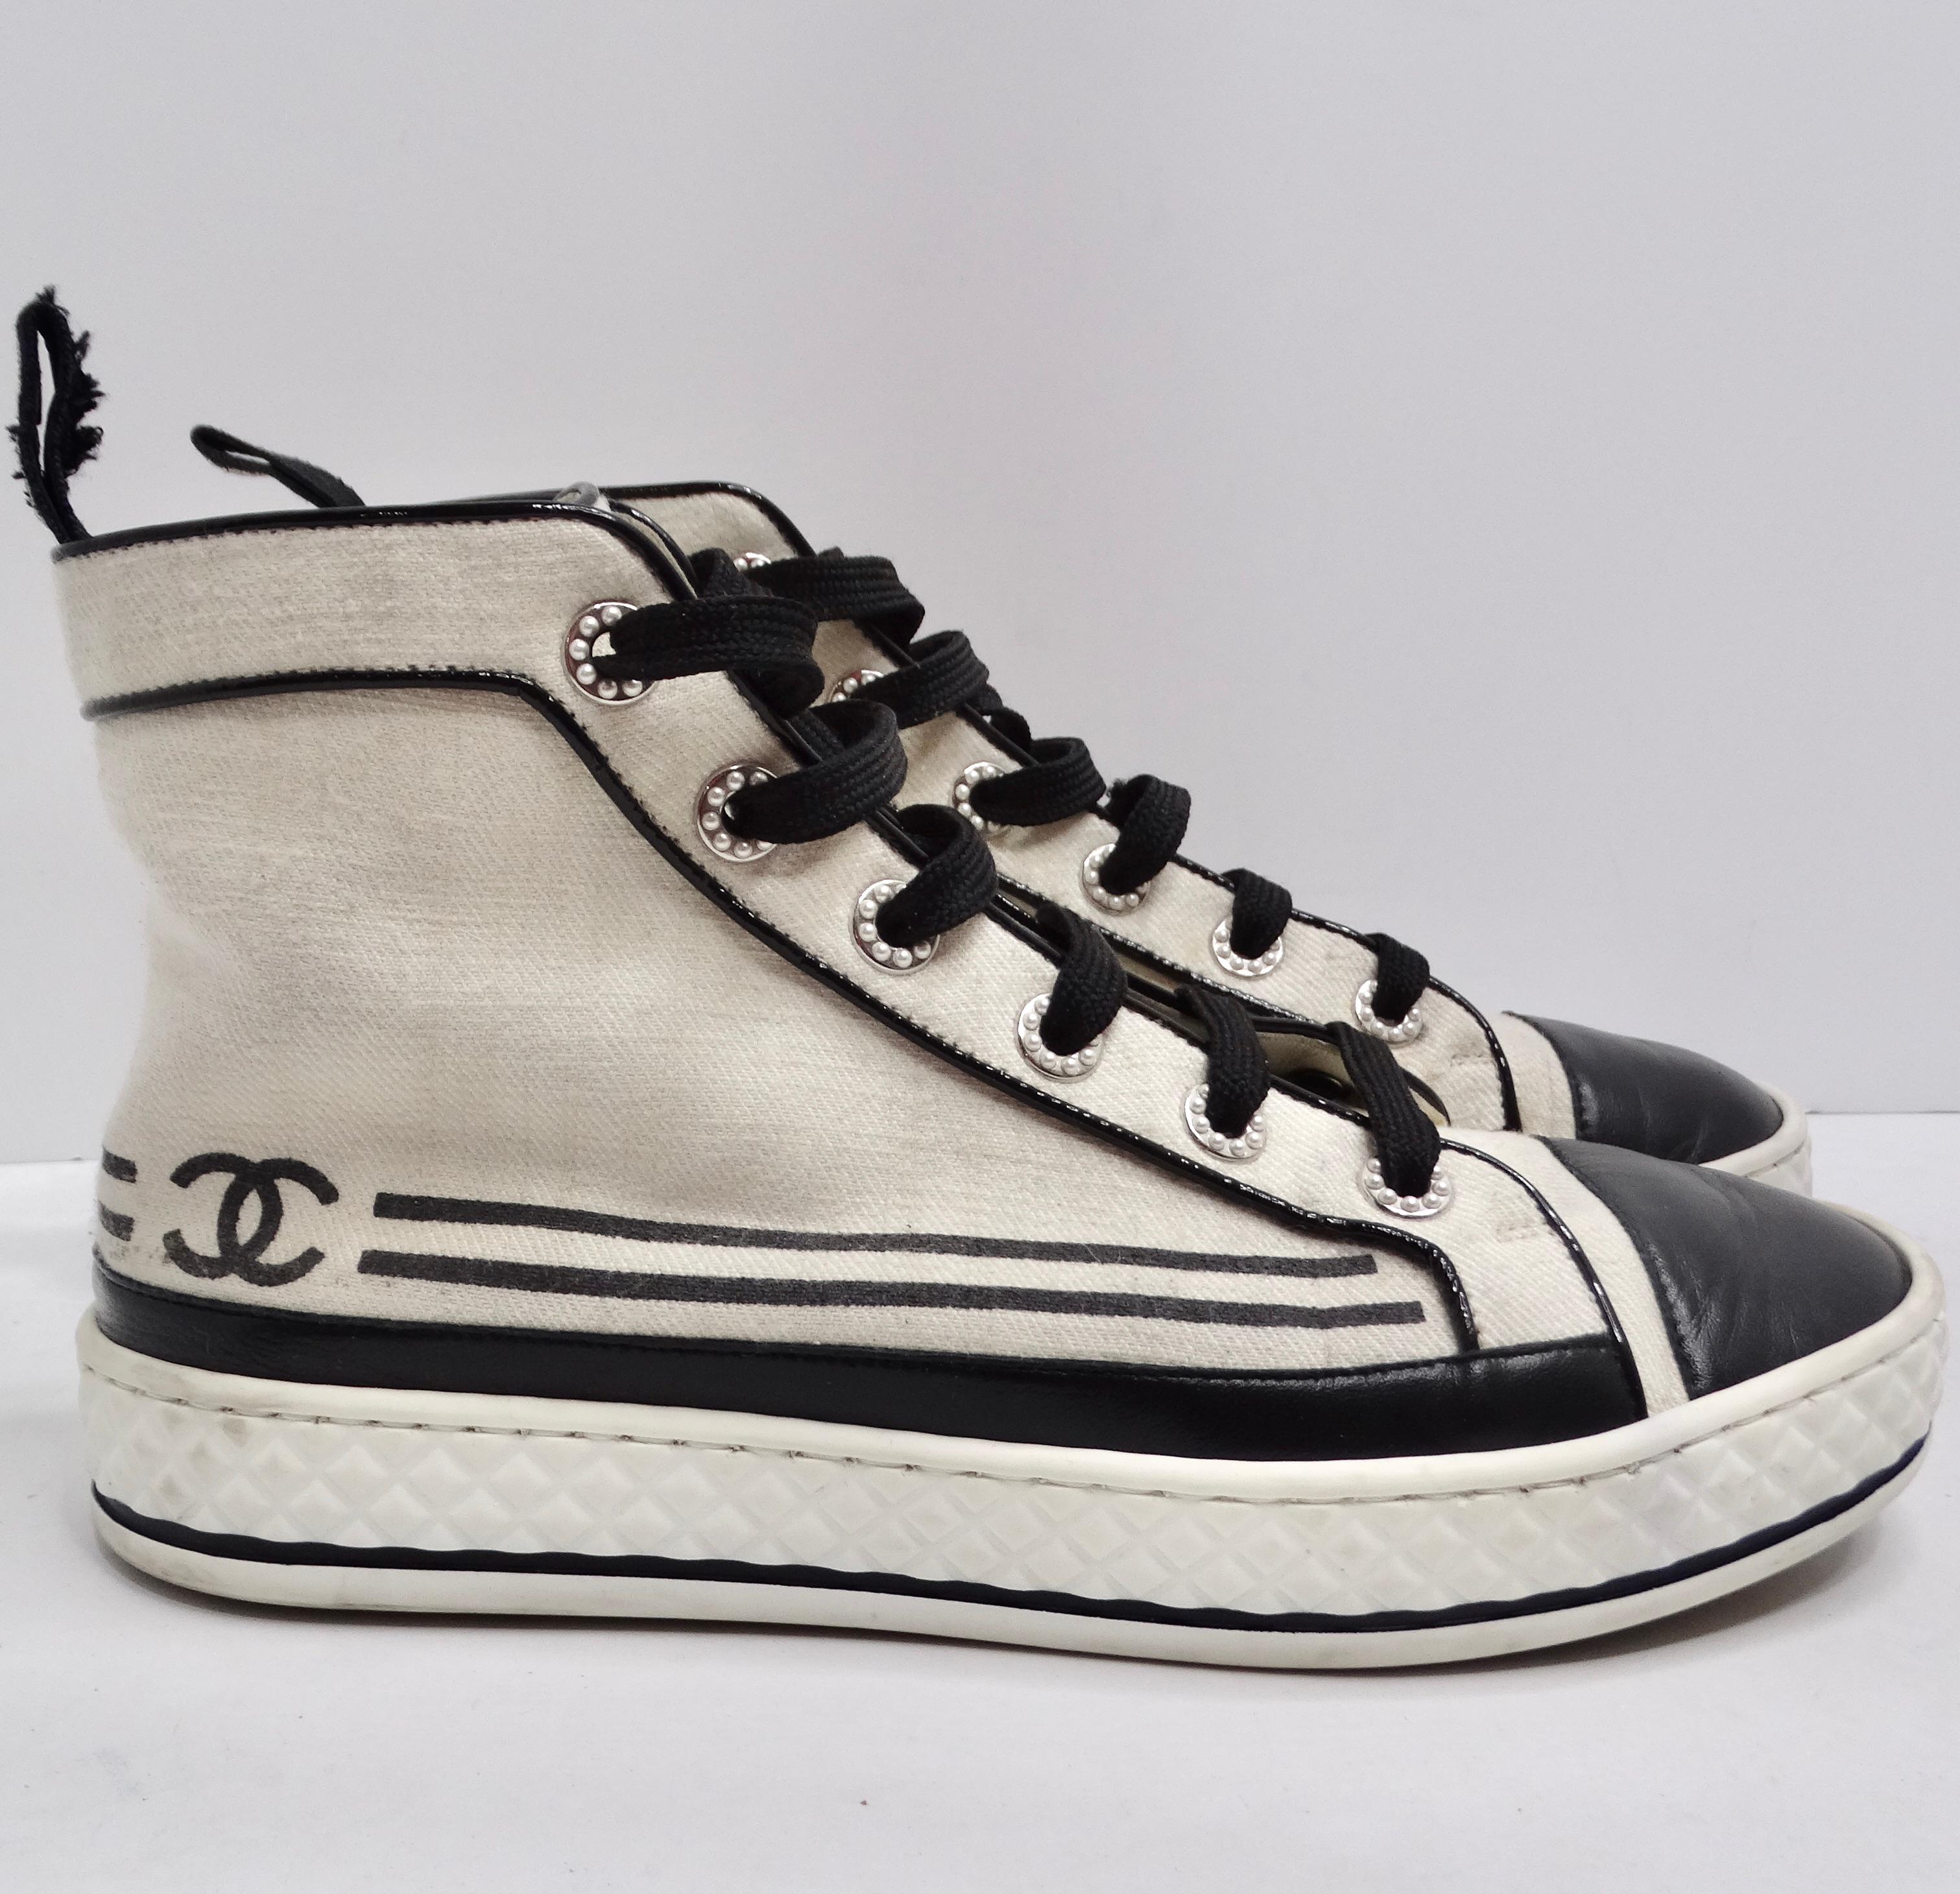 Chanel CC Canvas High Top Sneakers In Excellent Condition For Sale In Scottsdale, AZ